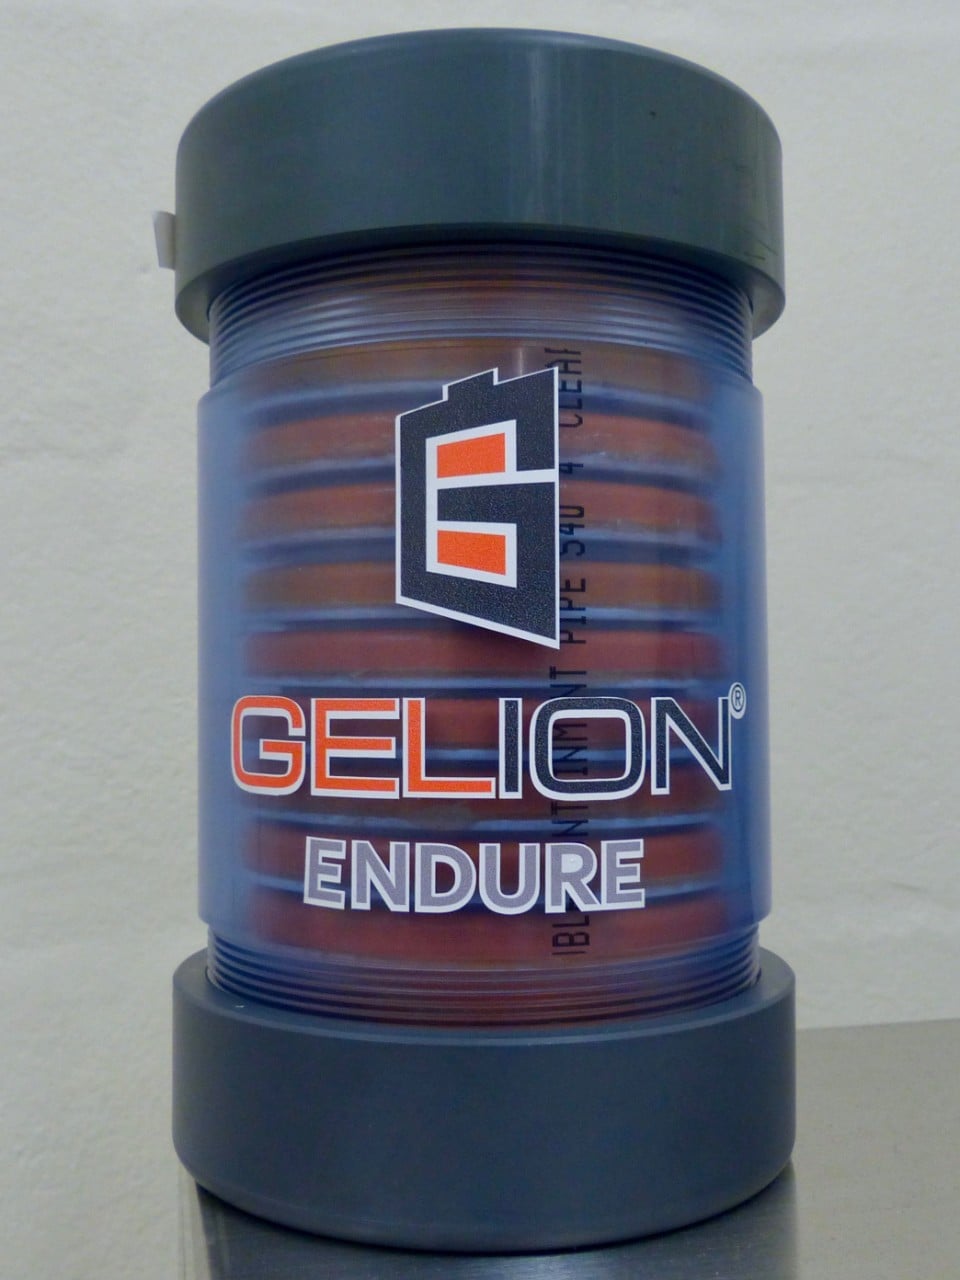 One of the Gelion endure battery stacks.